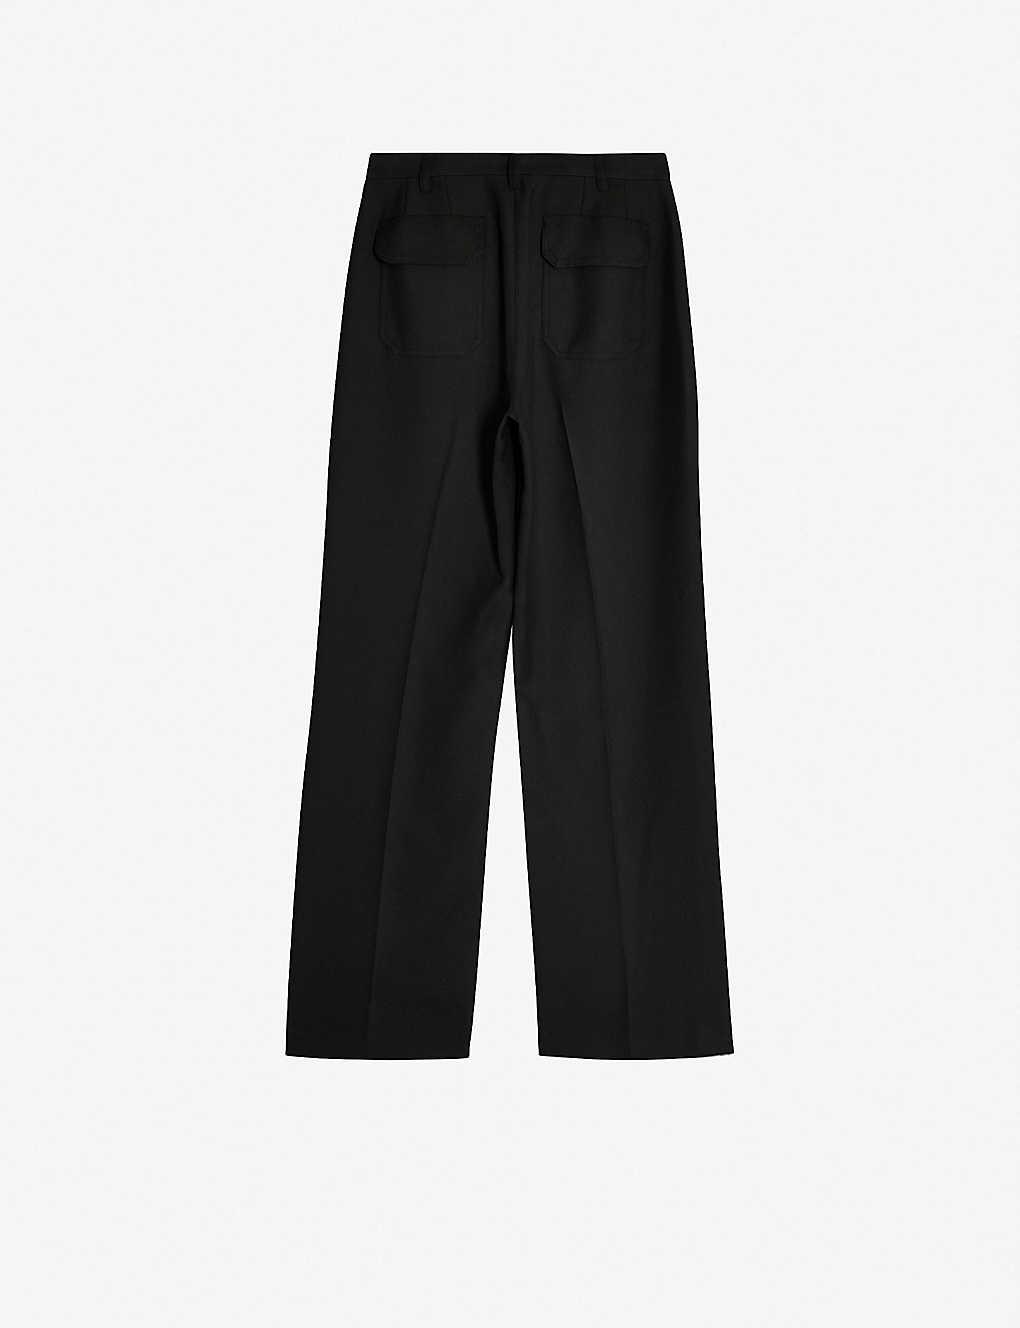 Topshop Smart Premium Tailored Trousers in Grey